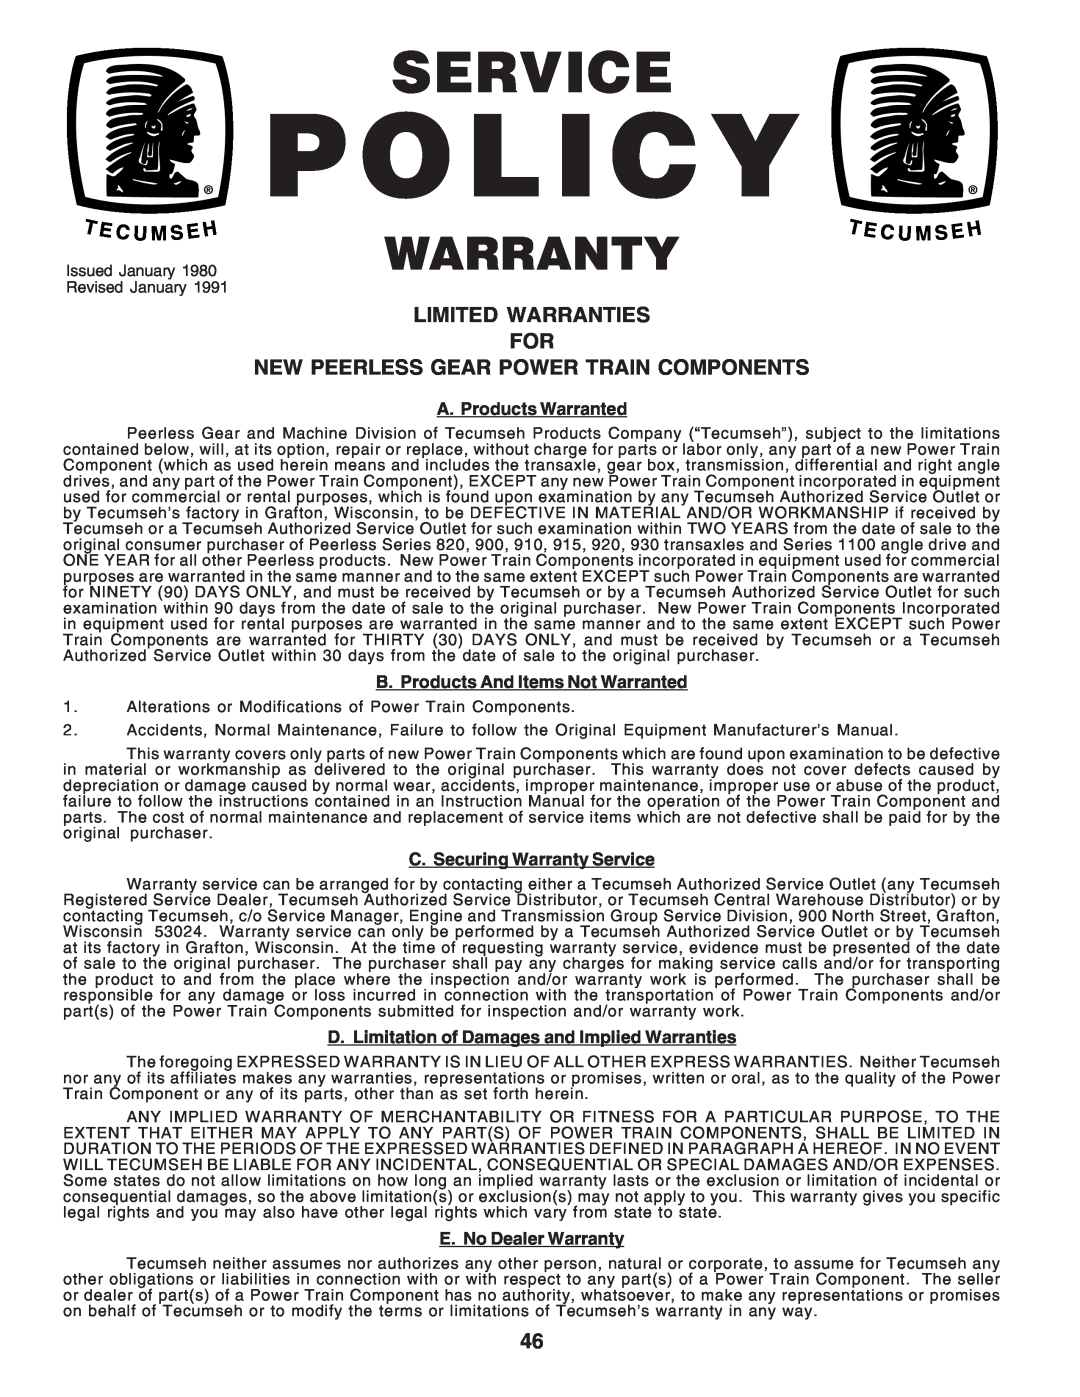 Poulan PC1538B Limited Warranties For, New Peerless Gear Power Train Components, T E C U M Seh, Policy, Service, Warranty 